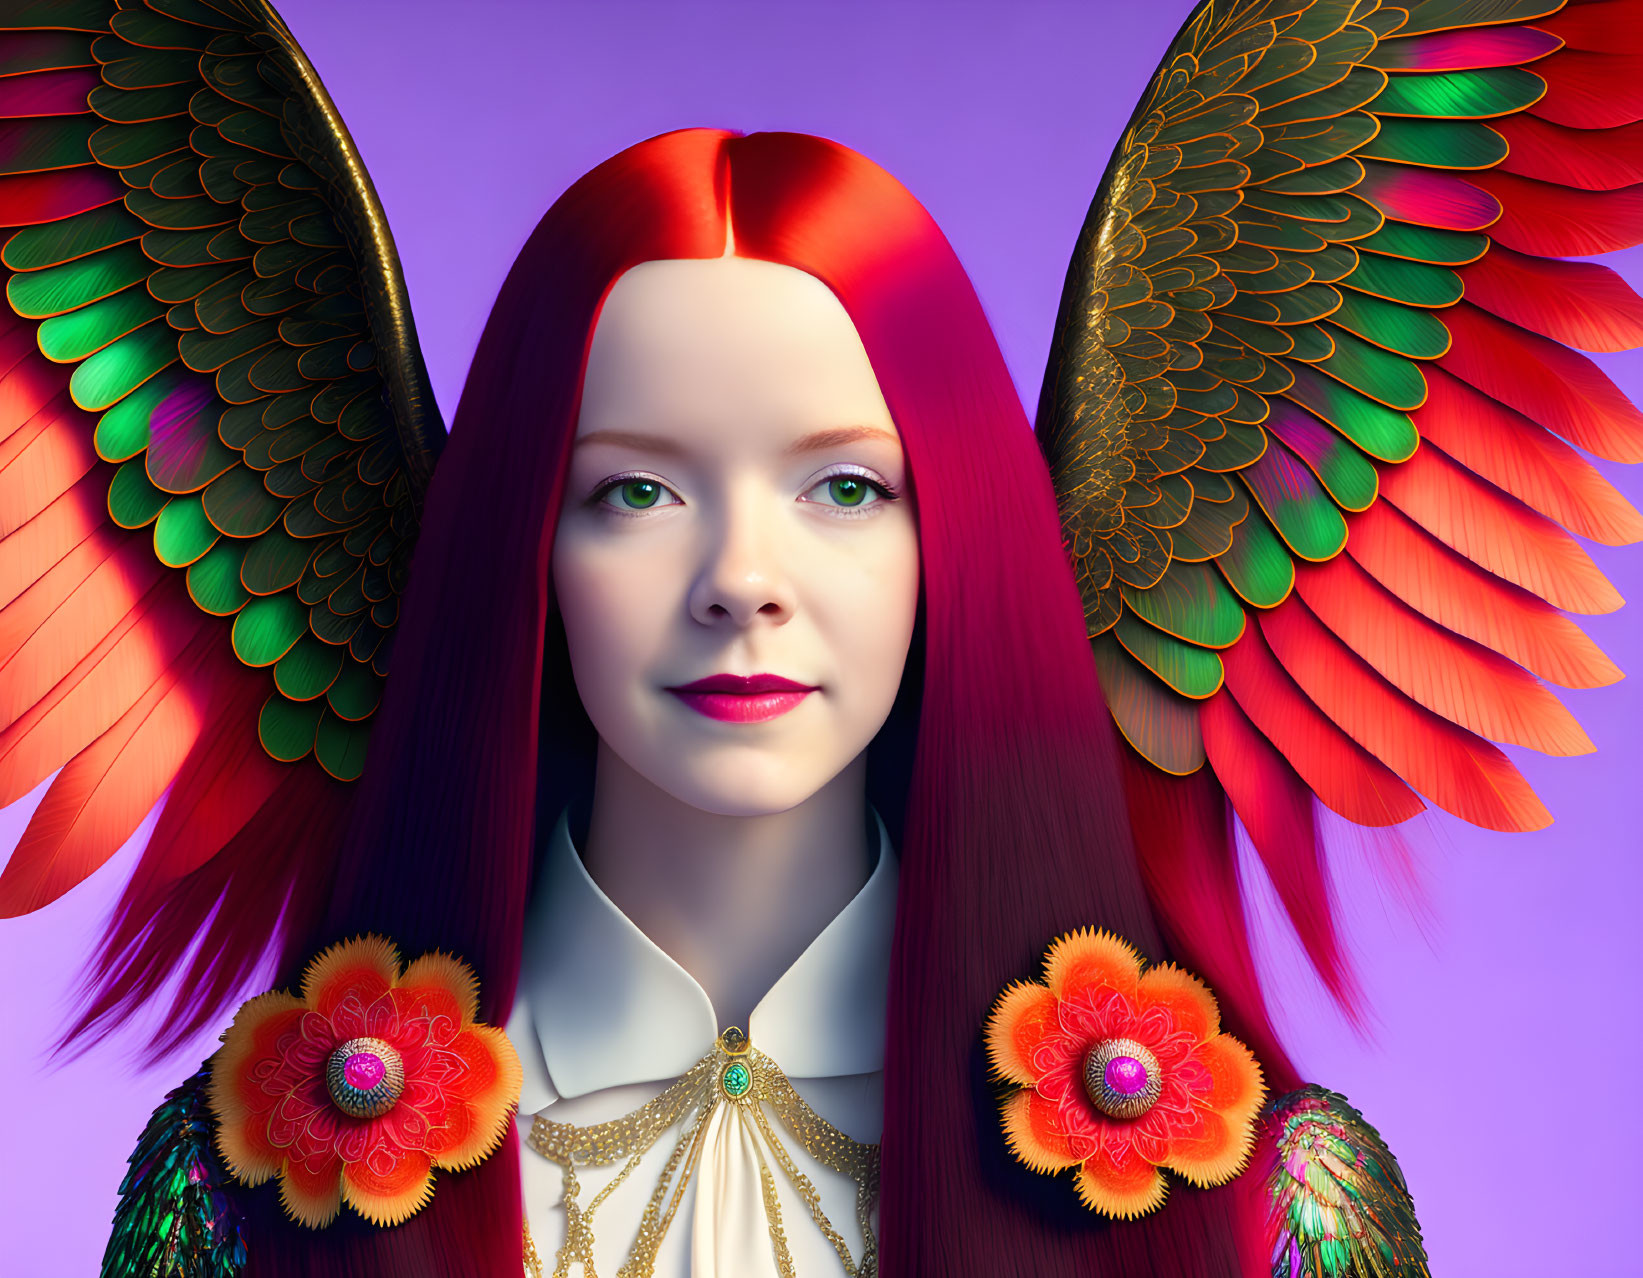 Vibrant digital artwork of a woman with red hair, blue eyes, colorful wings, gold-tr